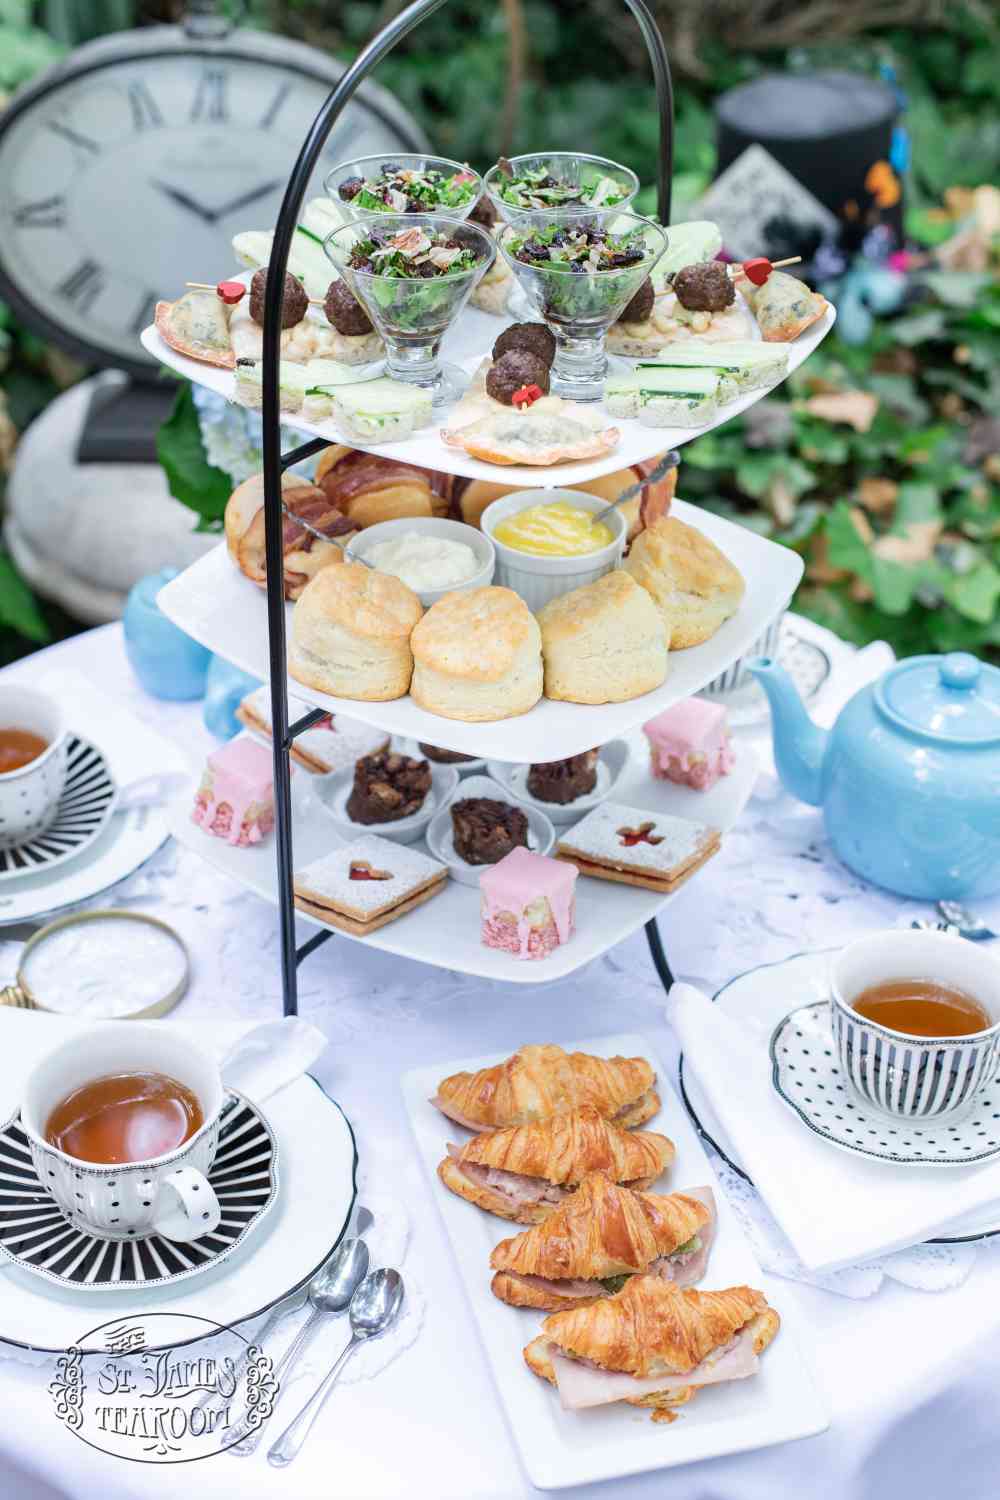 Whimsical Wonderland Afternoon Tea Menu - Dine in Tray for 4 Styled